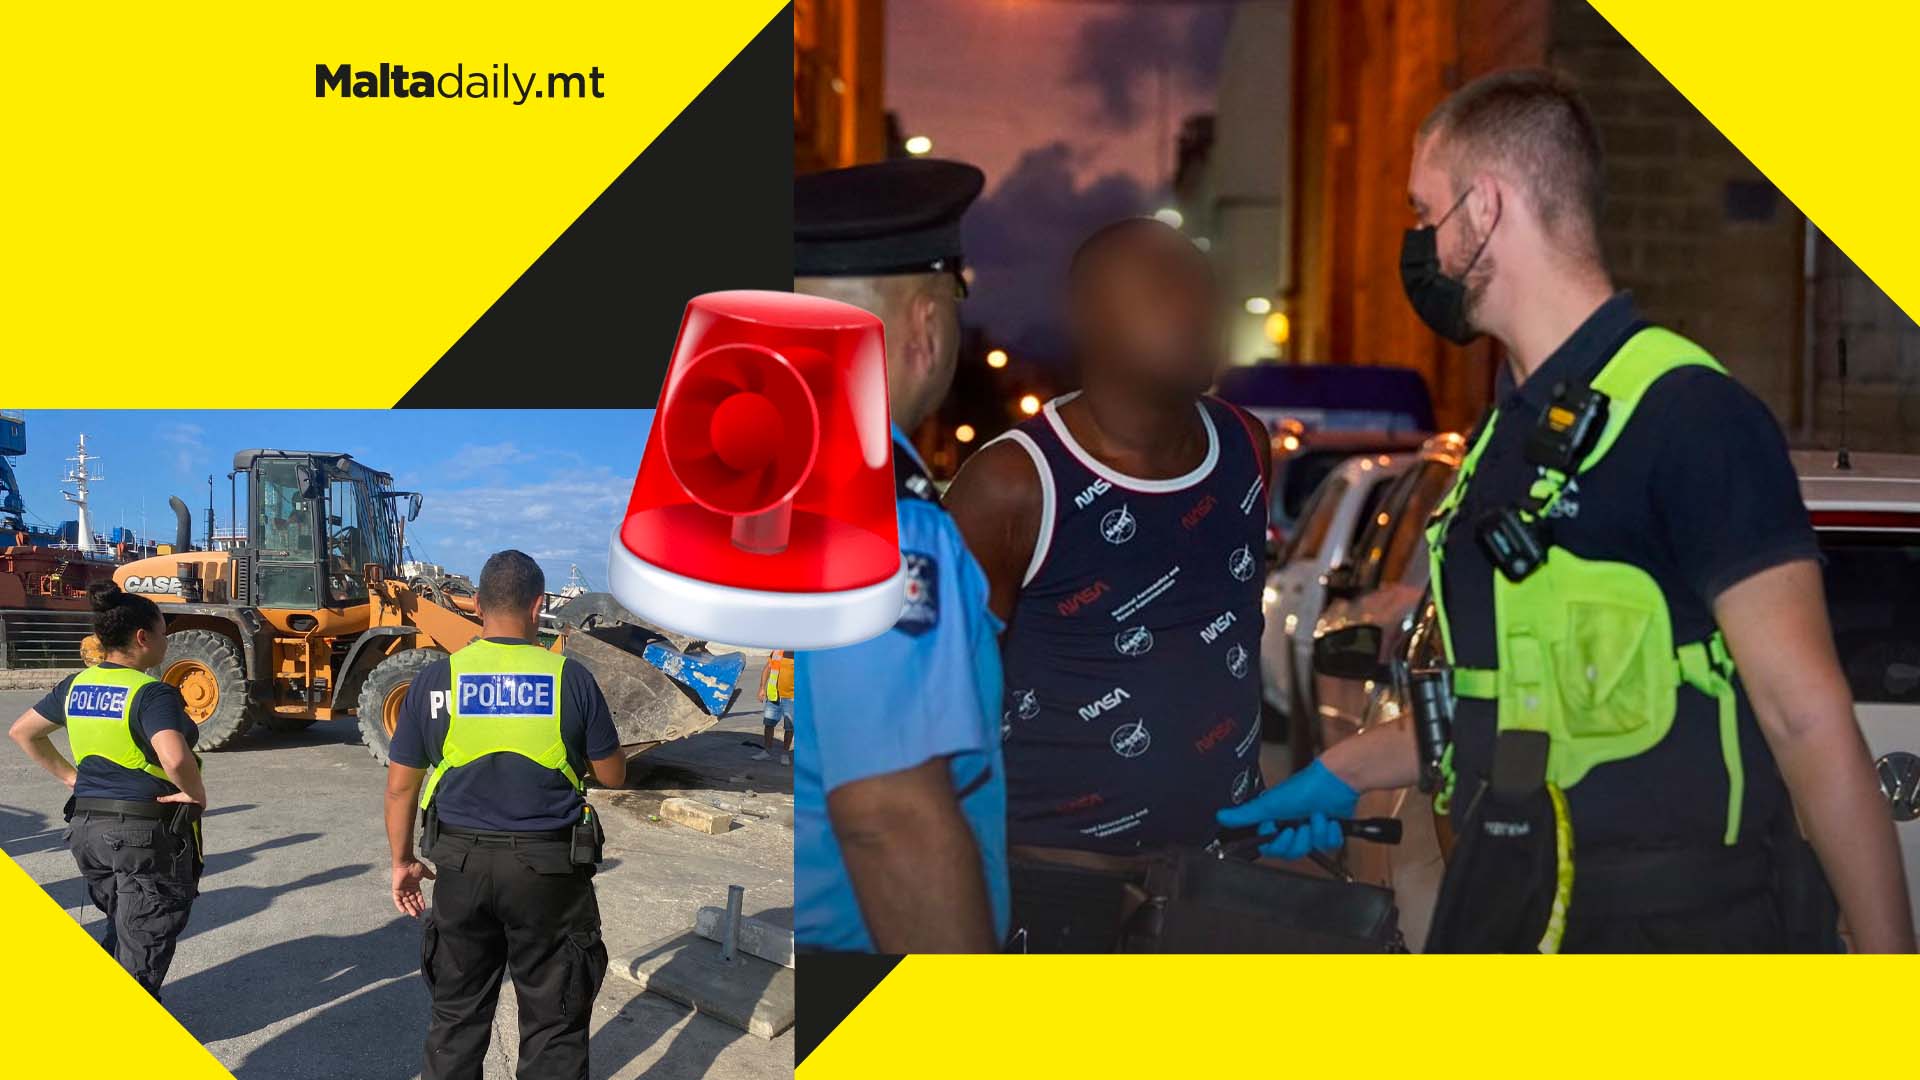 Over 70 arrests in one week: here’s what went down